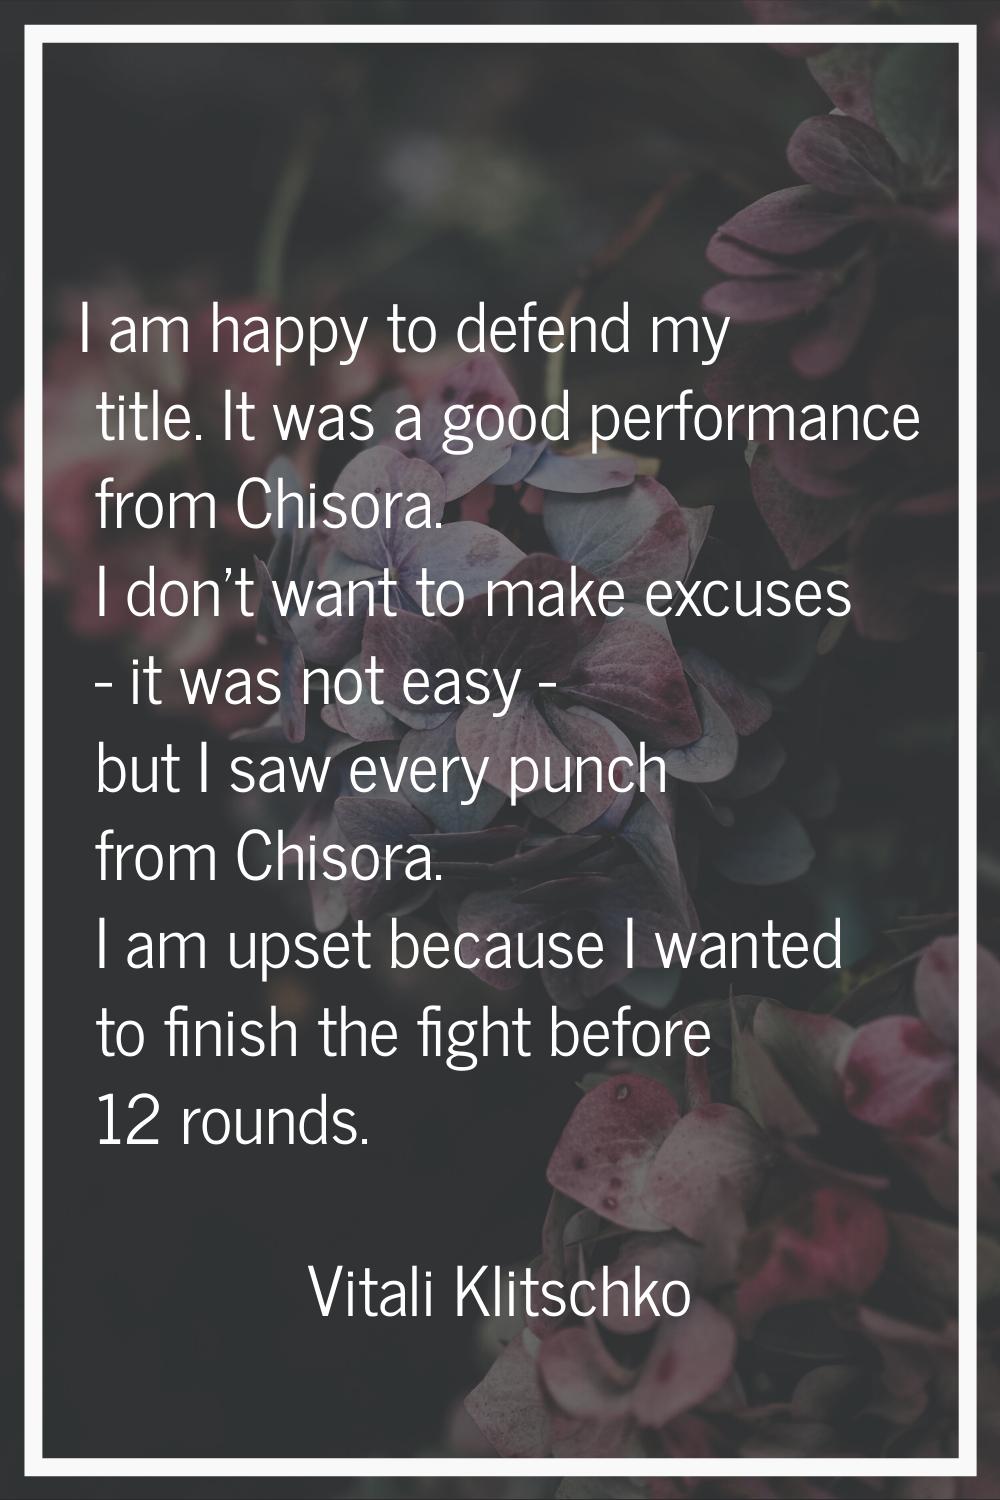 I am happy to defend my title. It was a good performance from Chisora. I don't want to make excuses